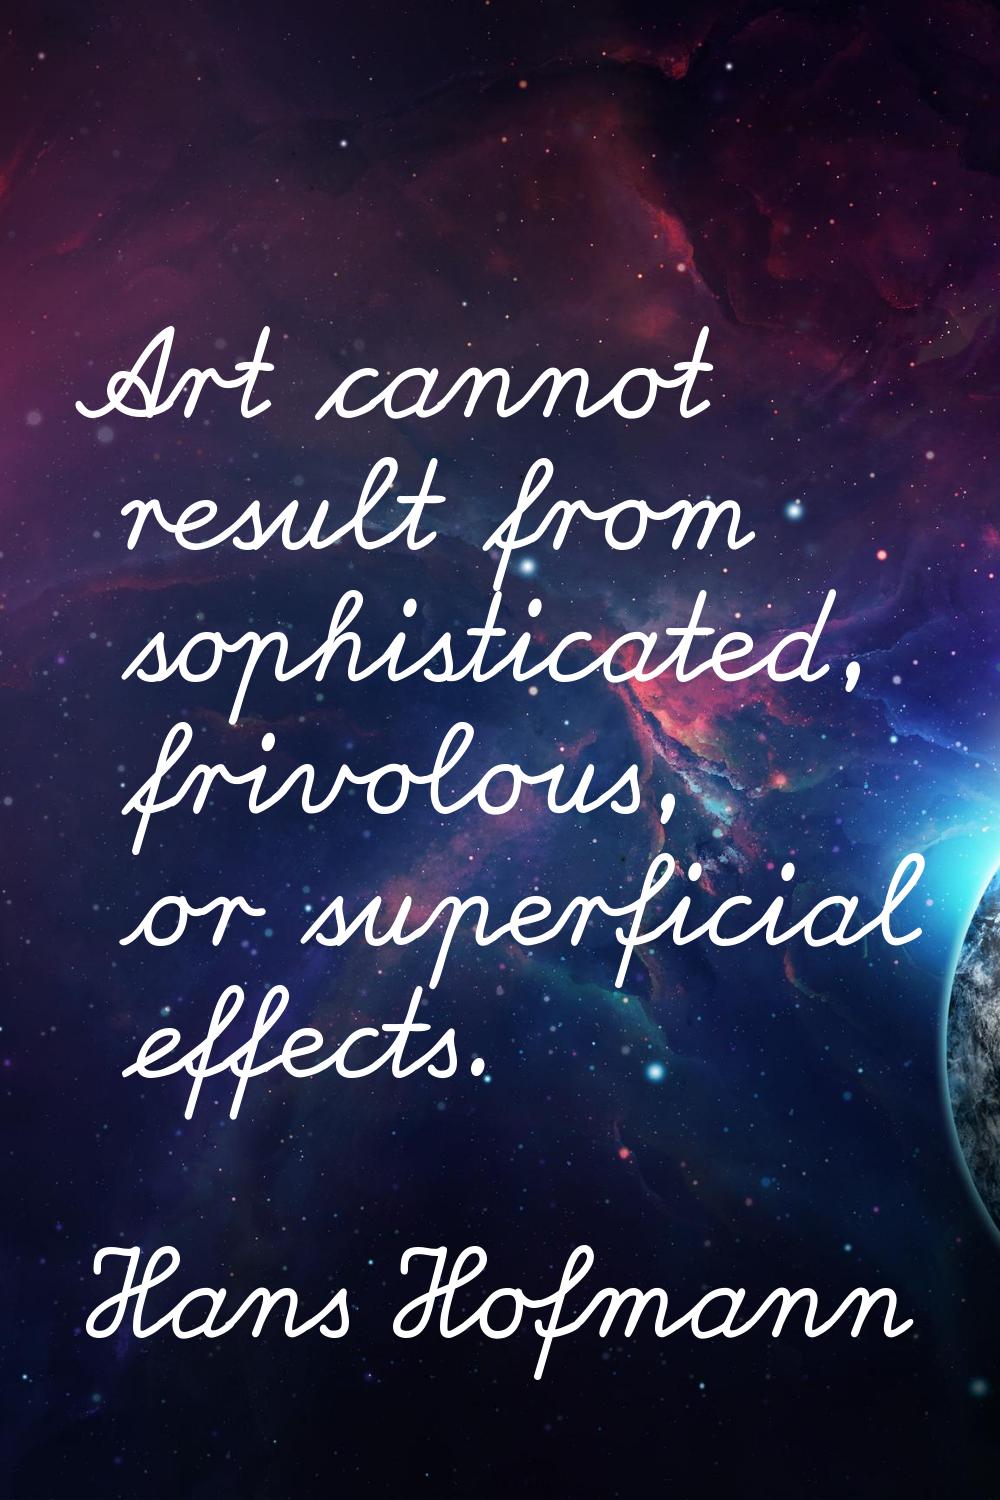 Art cannot result from sophisticated, frivolous, or superficial effects.